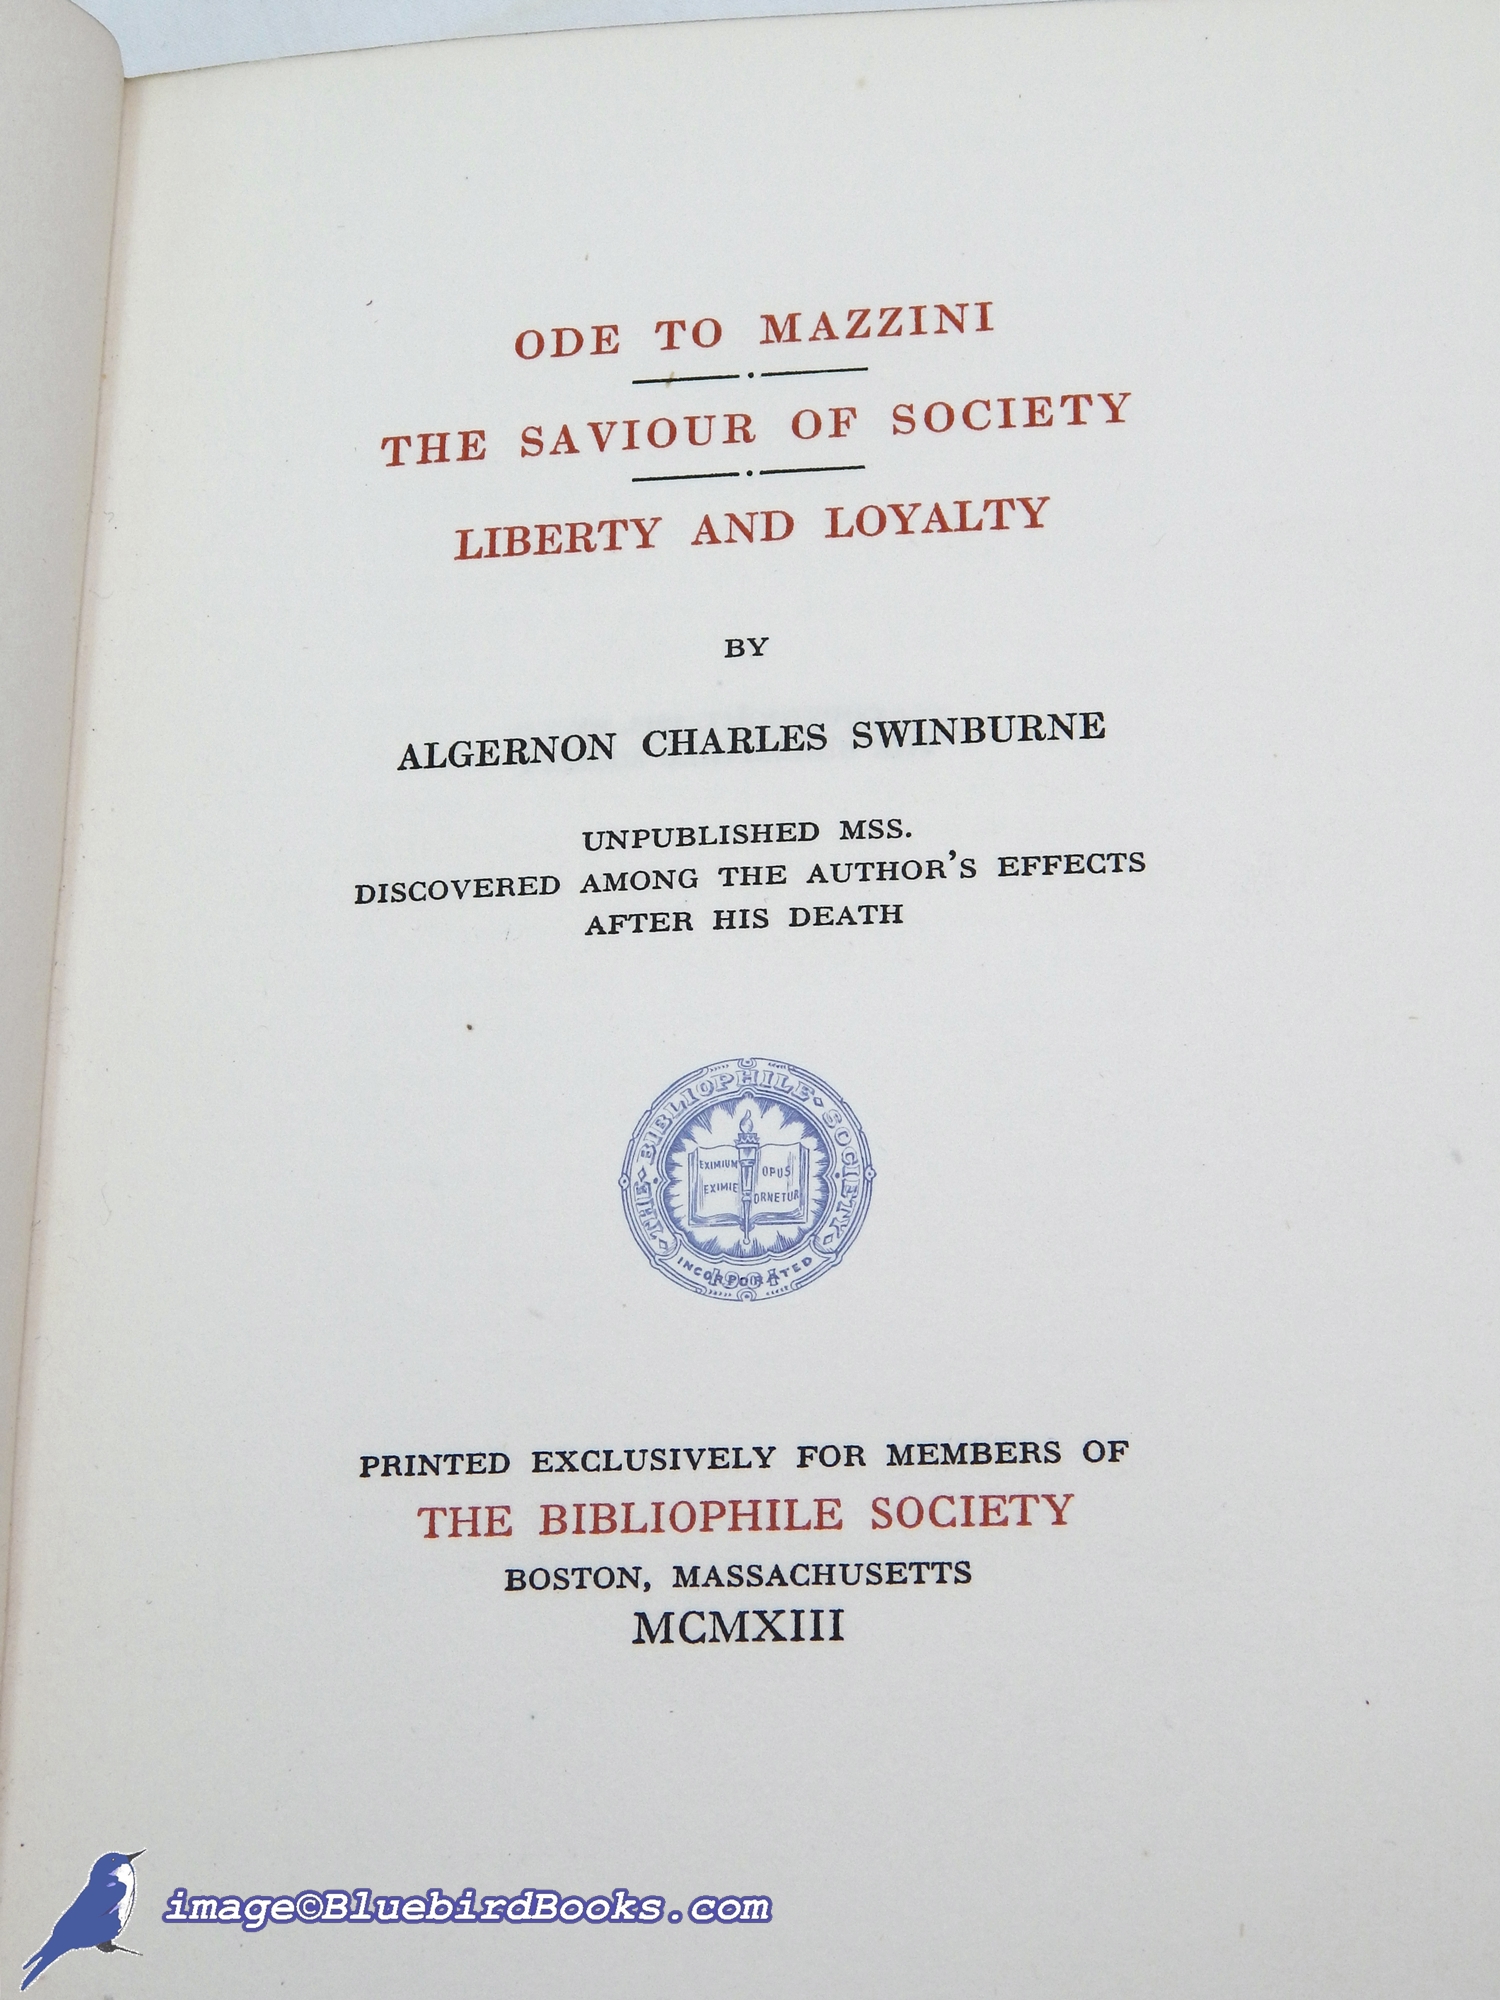 SWINBURNE, ALGERNON CHARLES - Ode to Mazzini / the Saviour of Society / Liberty and Loyalty Unpublished Mss. Discovered Among the Author's Effects After His Death